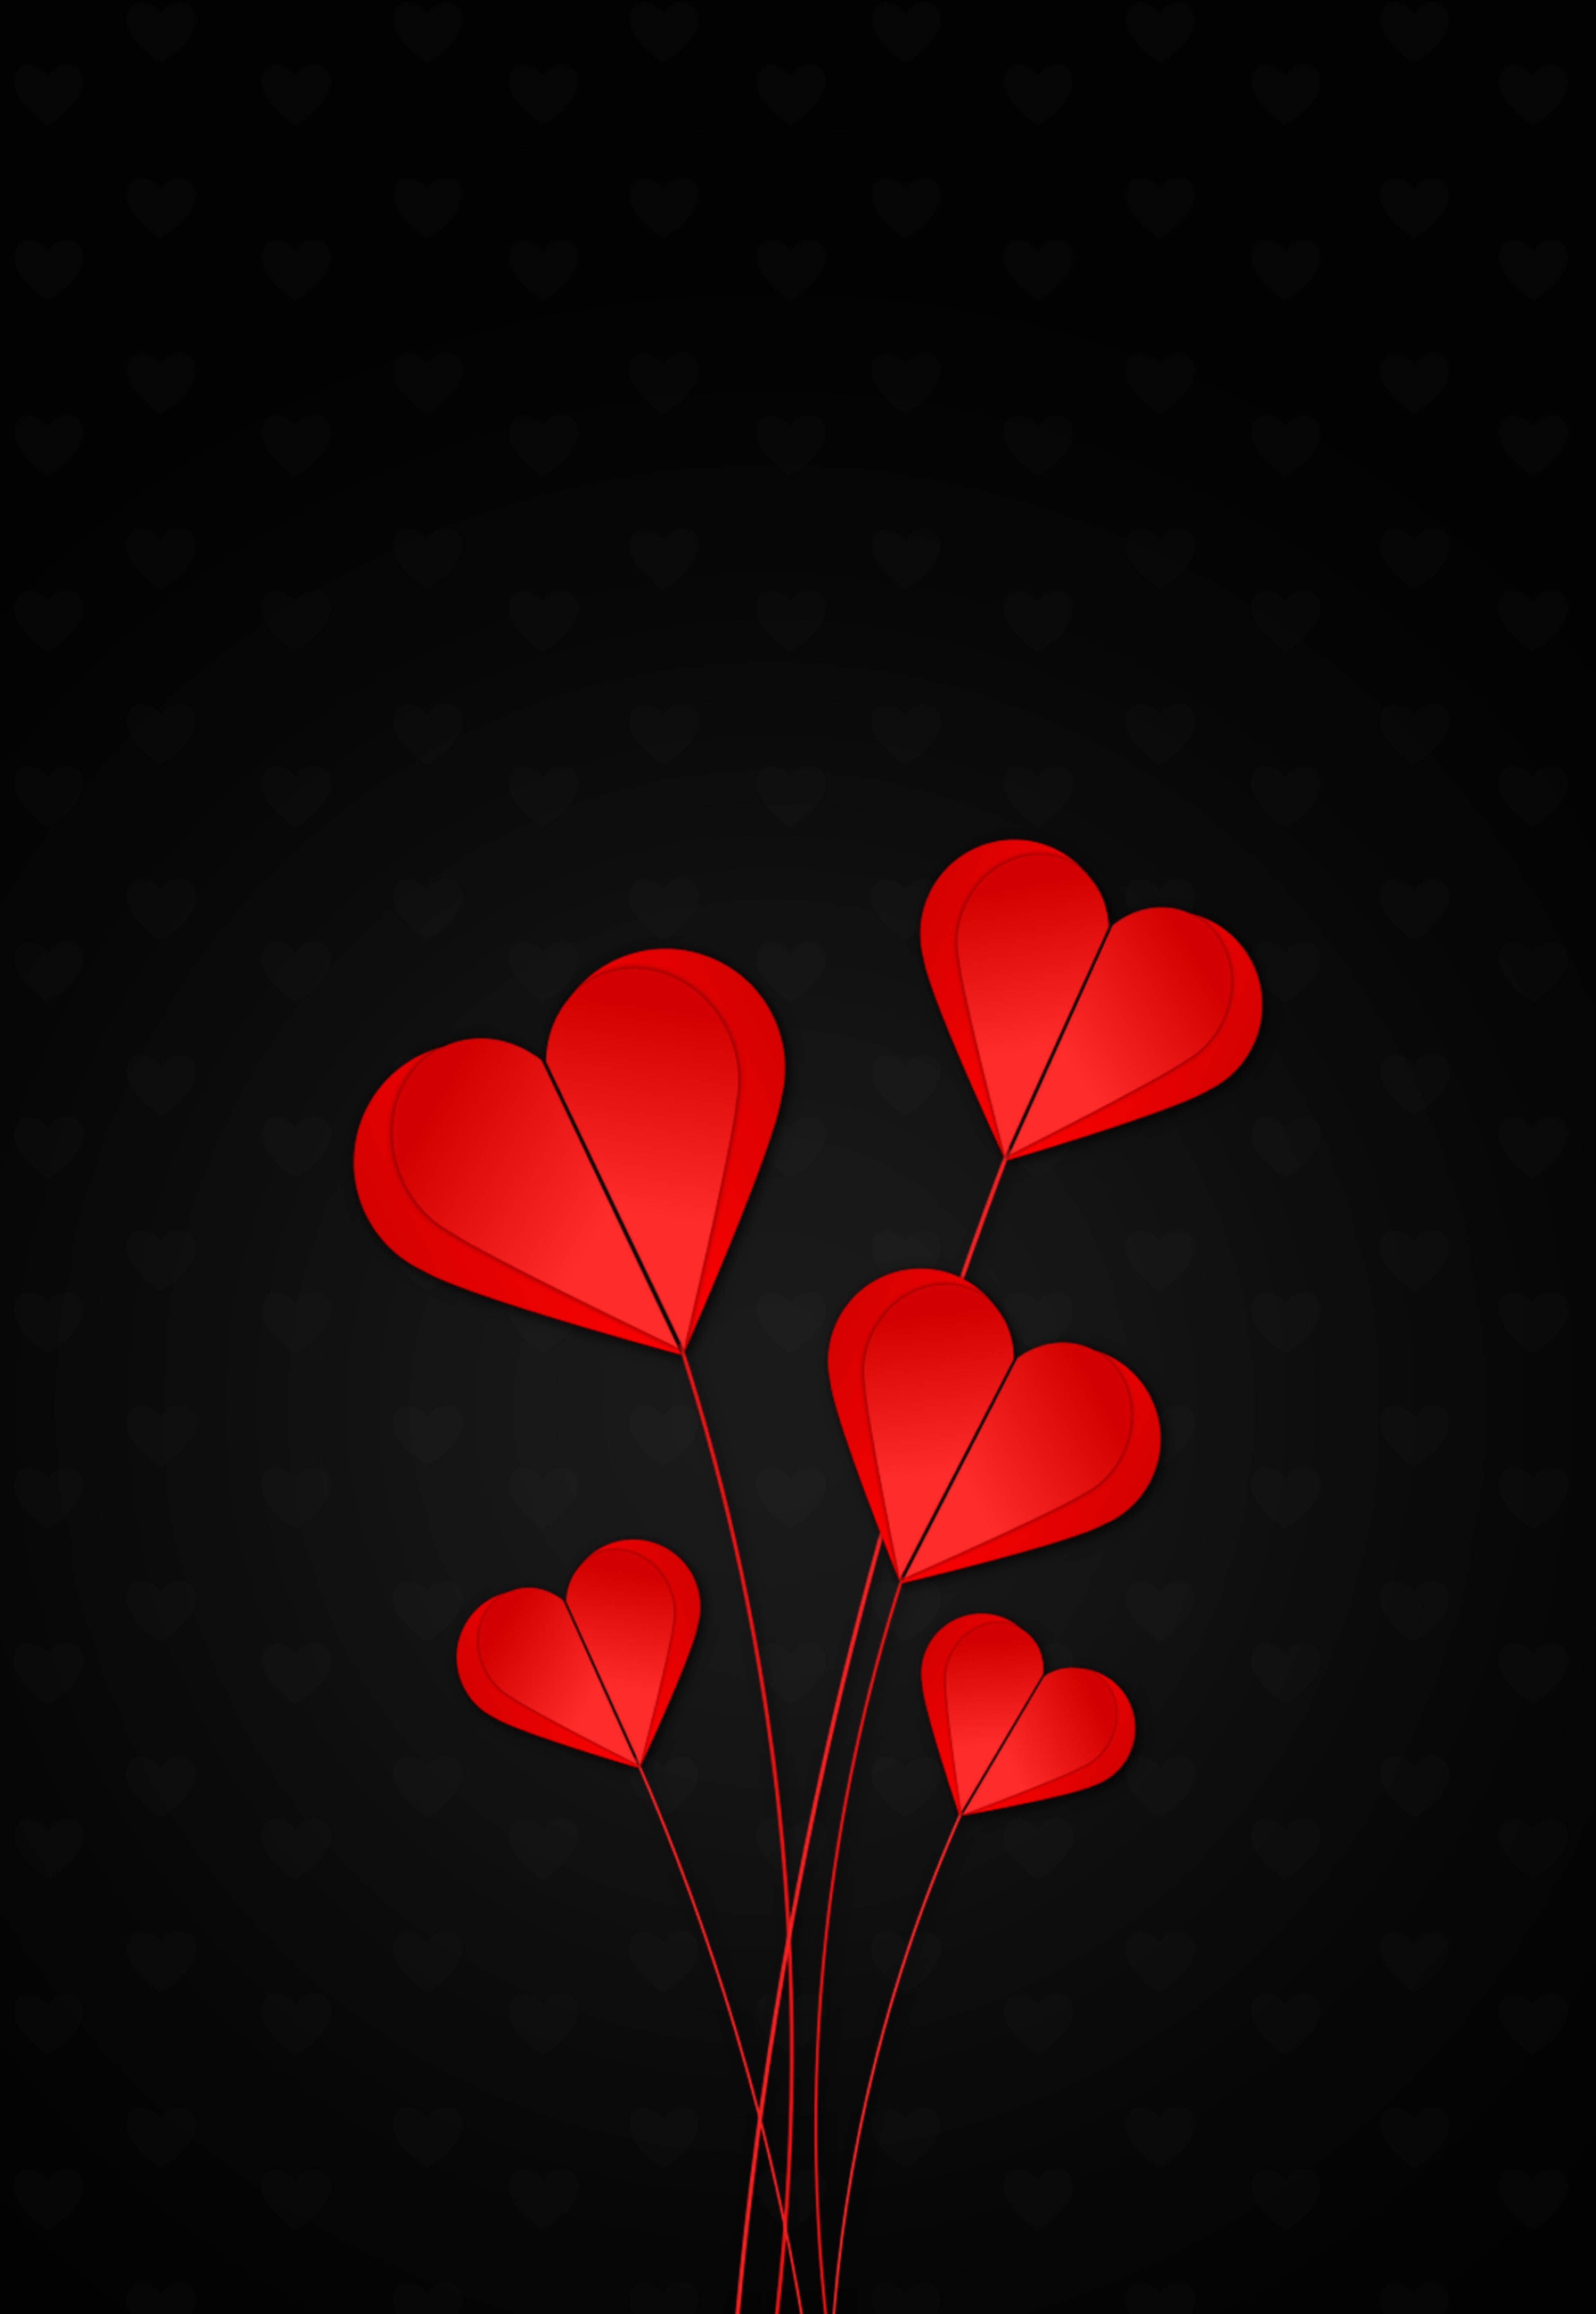 112079 download wallpaper black background, hearts, love, red screensavers and pictures for free